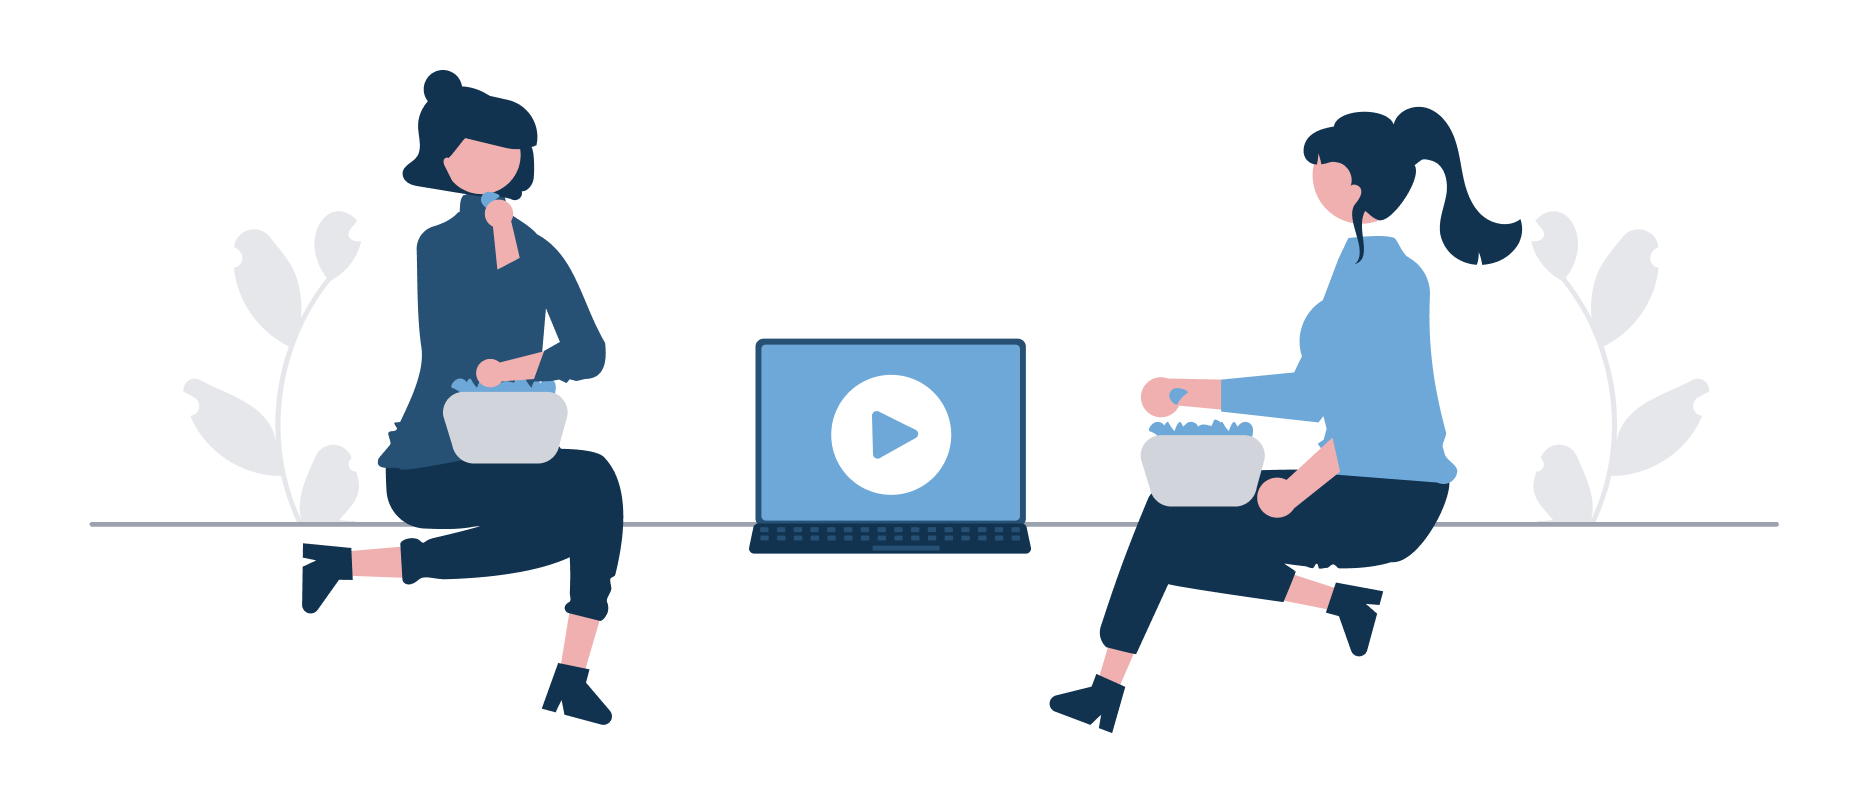 Illustration of two seated figures watching a video on a laptop and eating popcorn